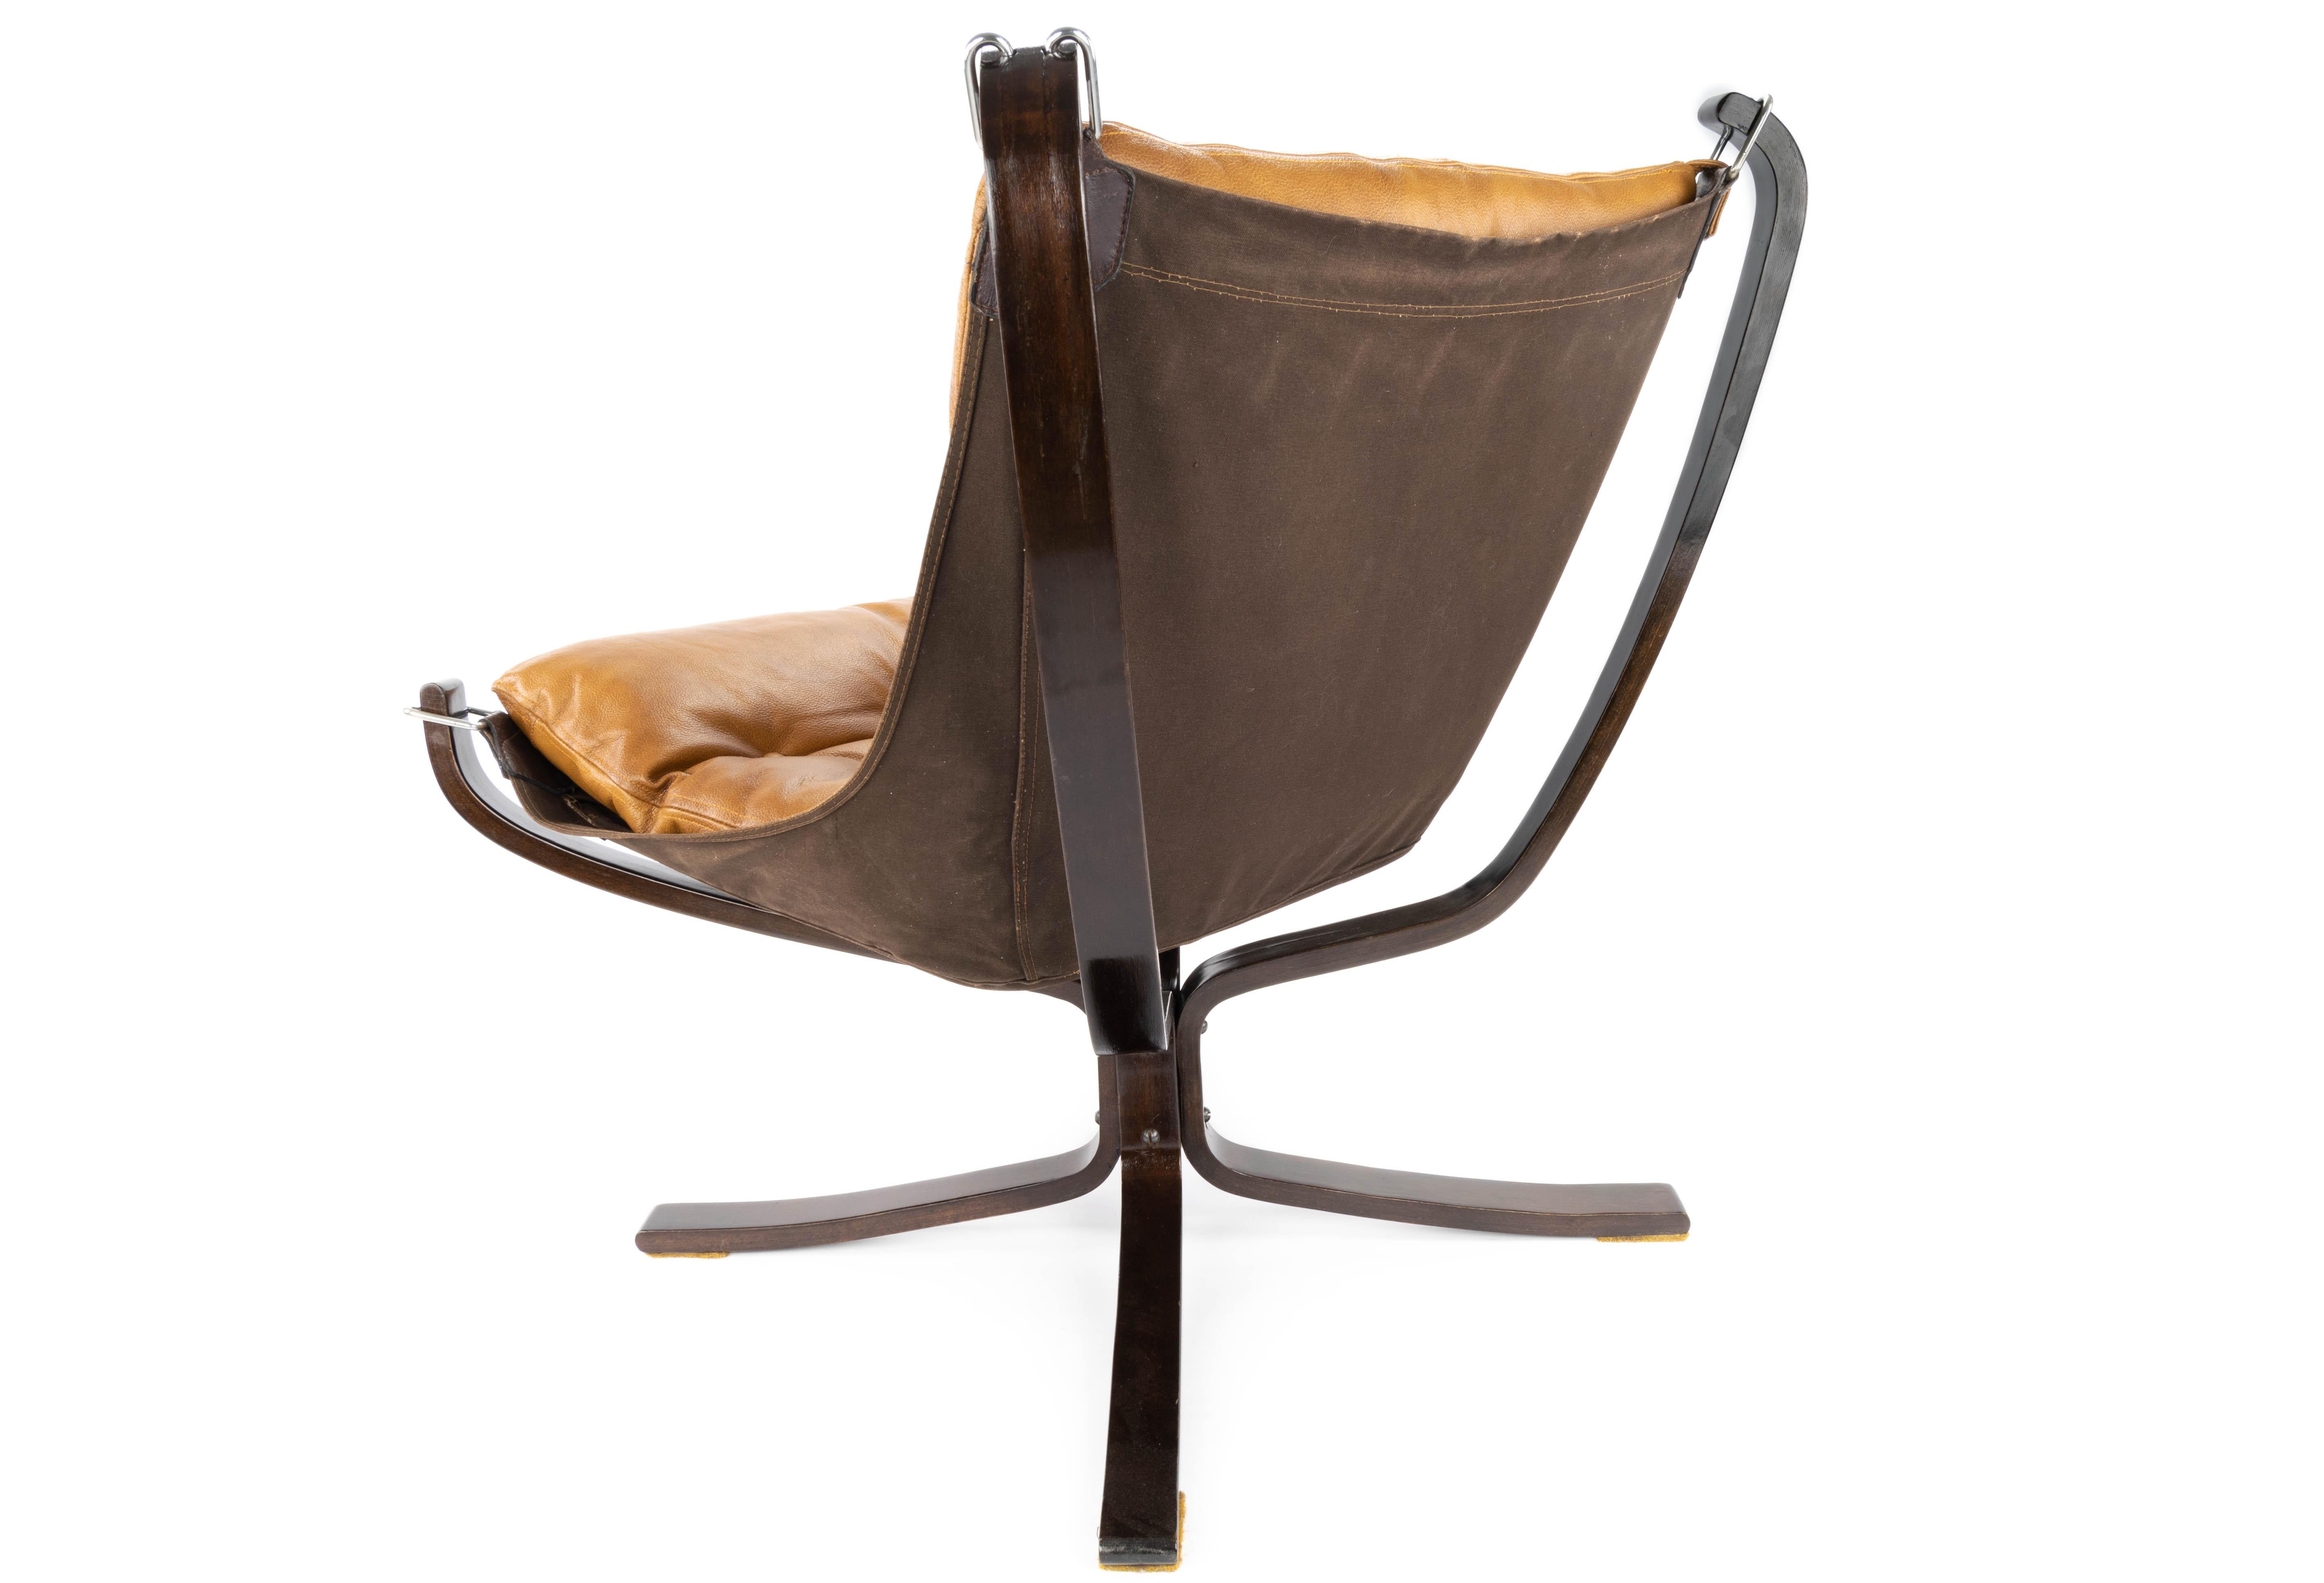 Dyed Cognac Leather Falcon Longe Chair by Sigurd Ressell for Vatne Möbler Norway 1970